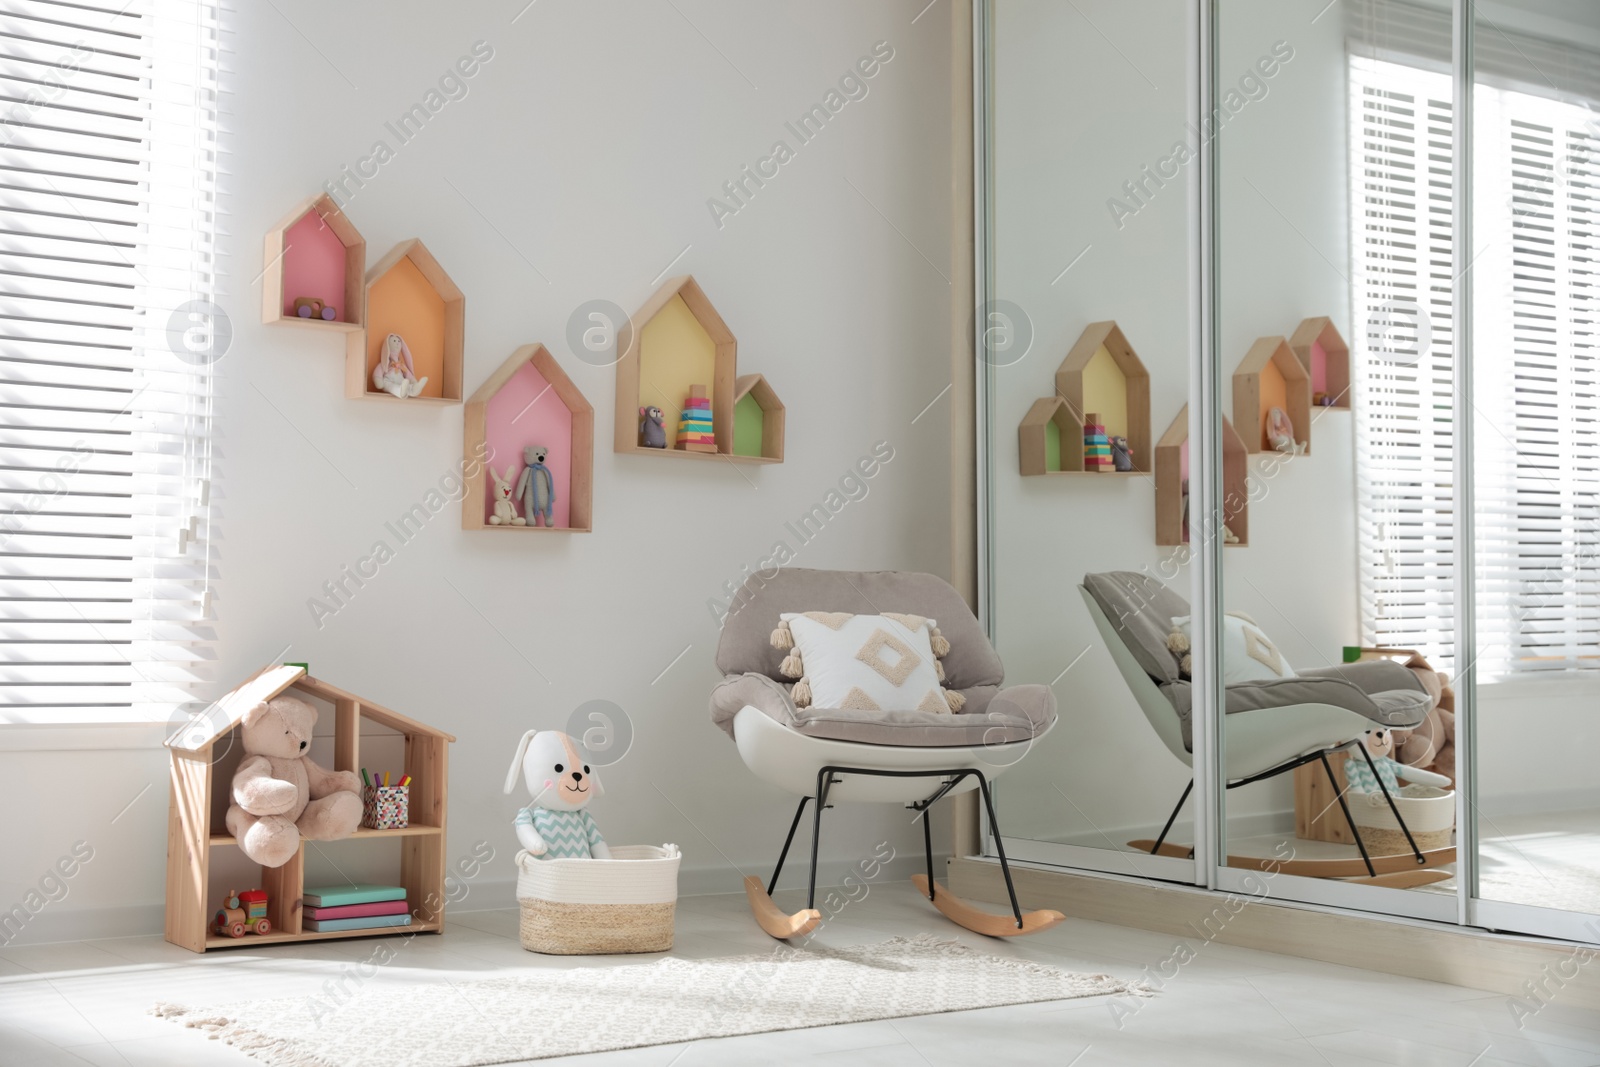 Photo of Cute children's room with house shaped shelves and rocking chair. Interior design